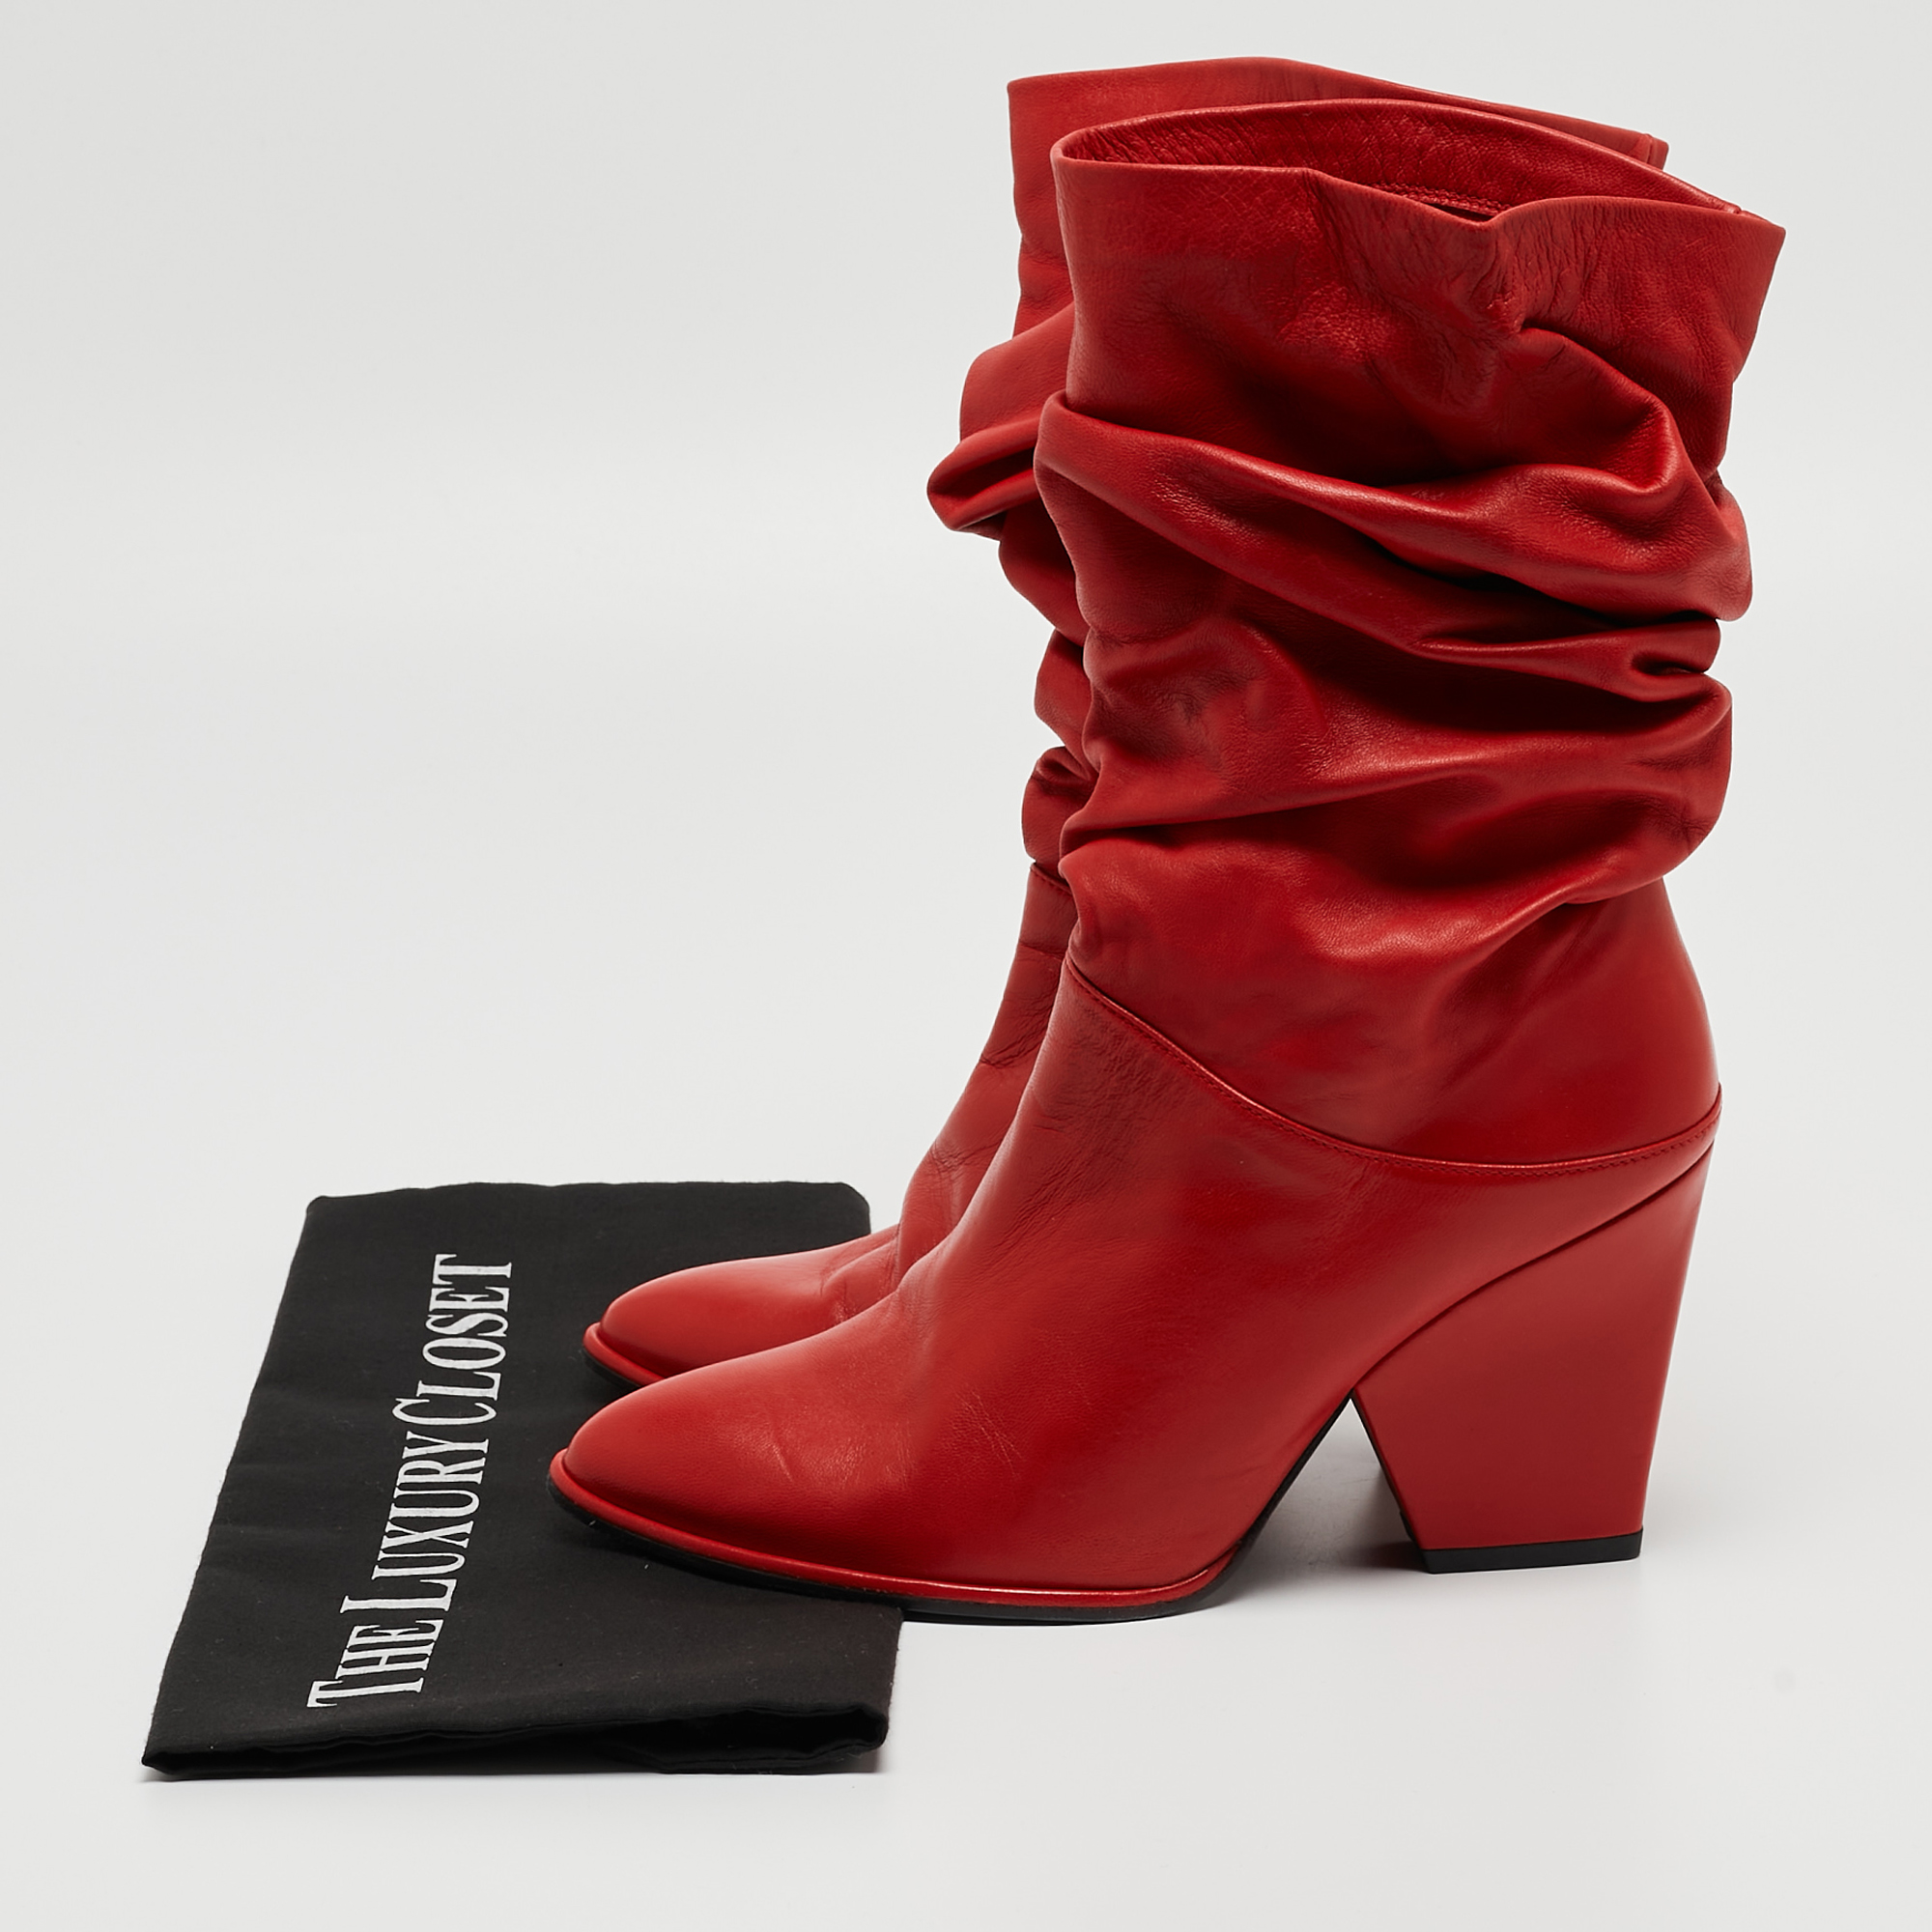 Stuart Weitzman Red Leather Slouch Block Heel Ankle Length Boots Size 36.5